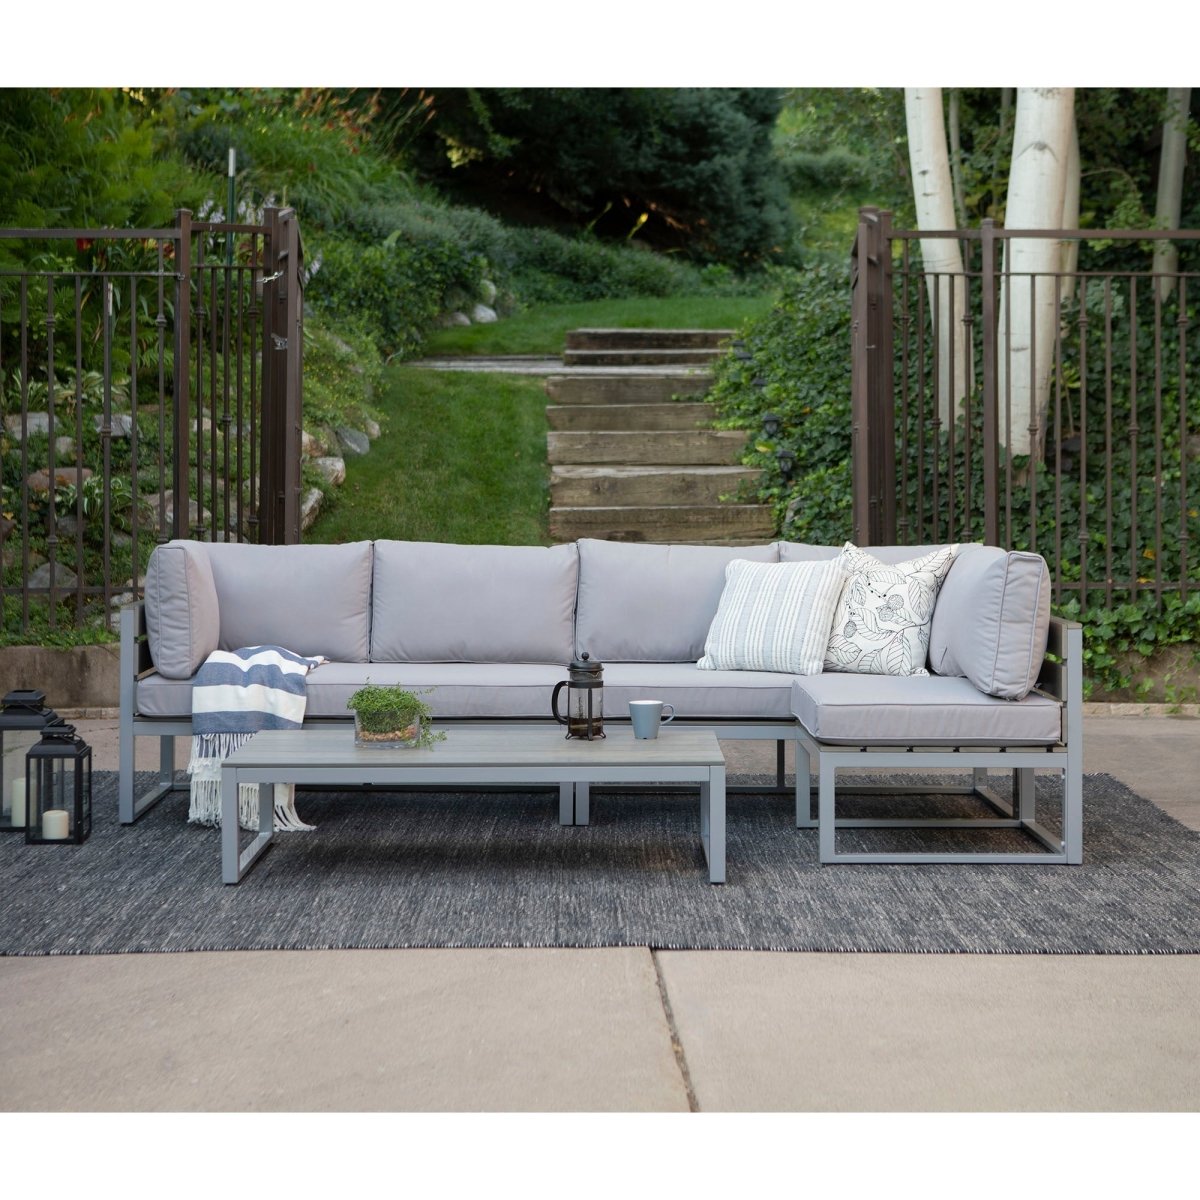 Walker Edison 4-Piece Jane Outdoor Patio Conversation Set with Cushions - lily & onyx